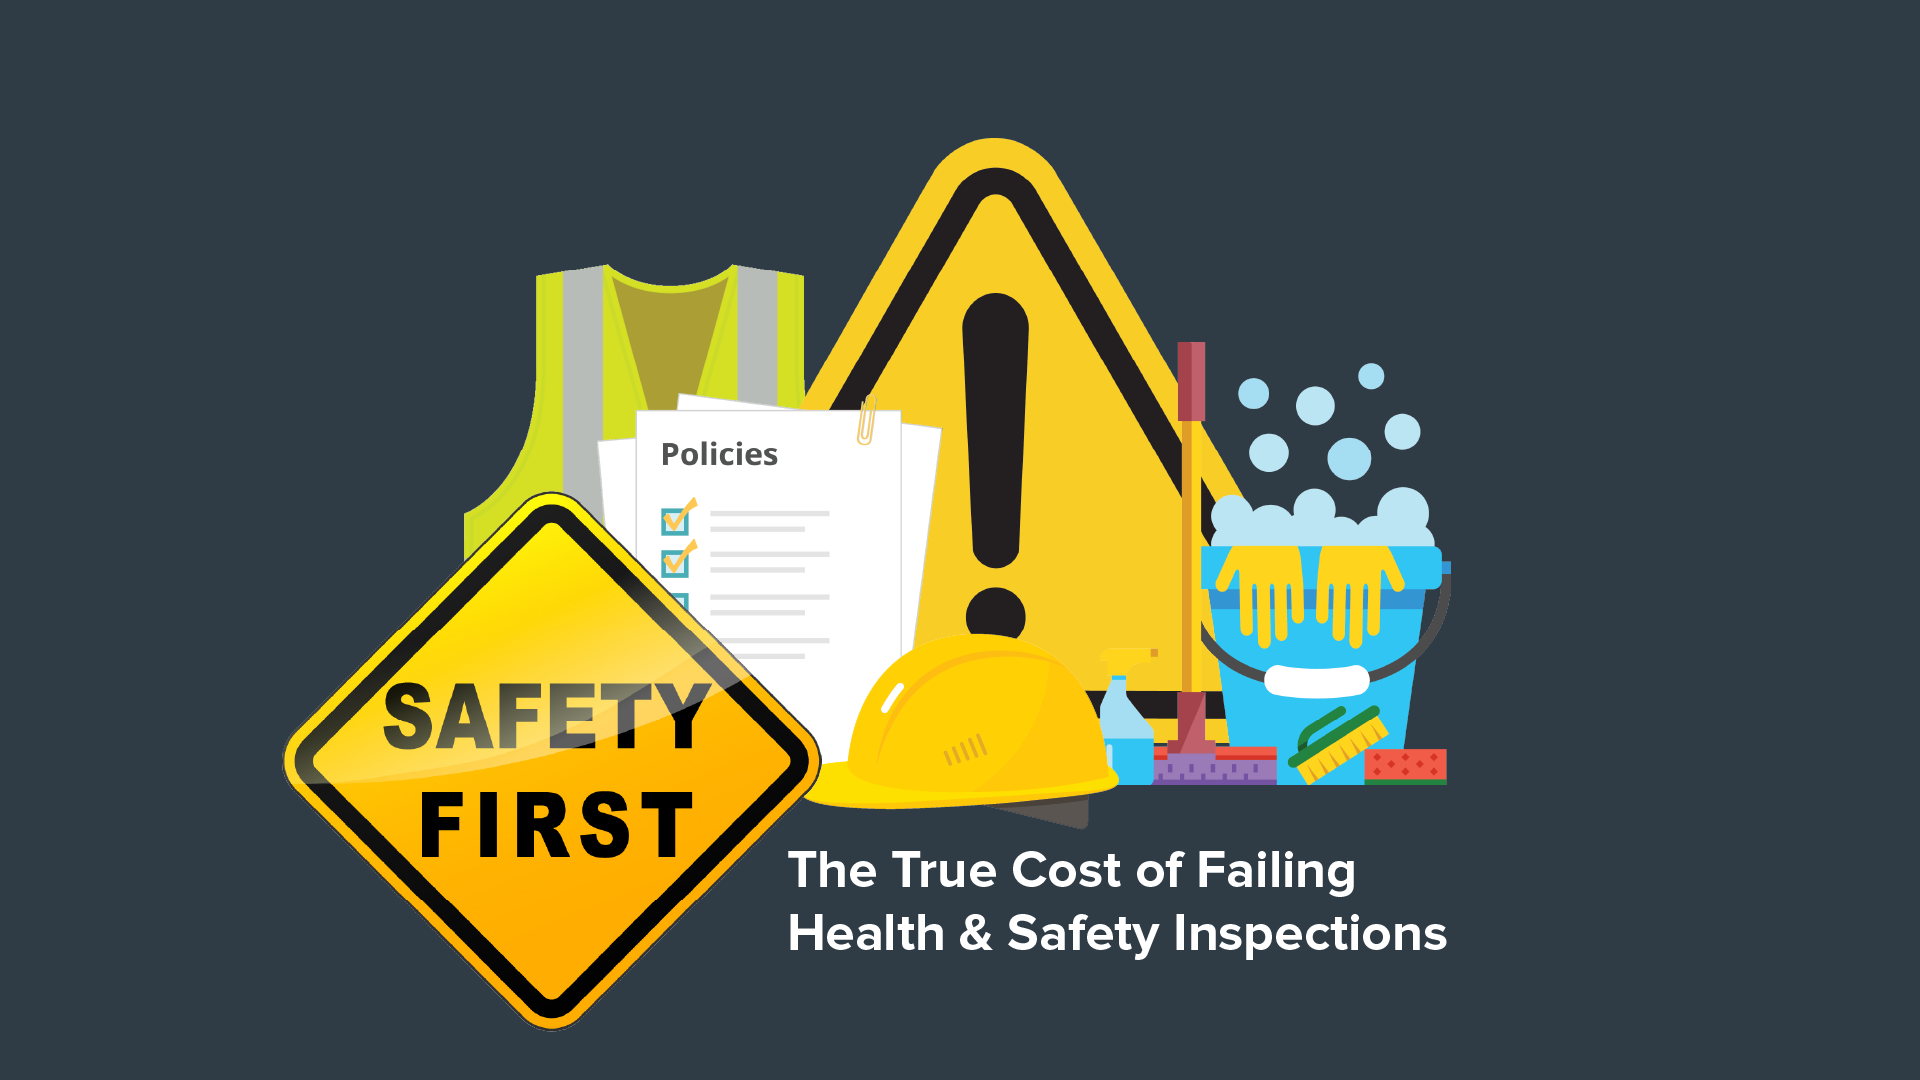 The True Cost of Failing Health & Safety Inspections